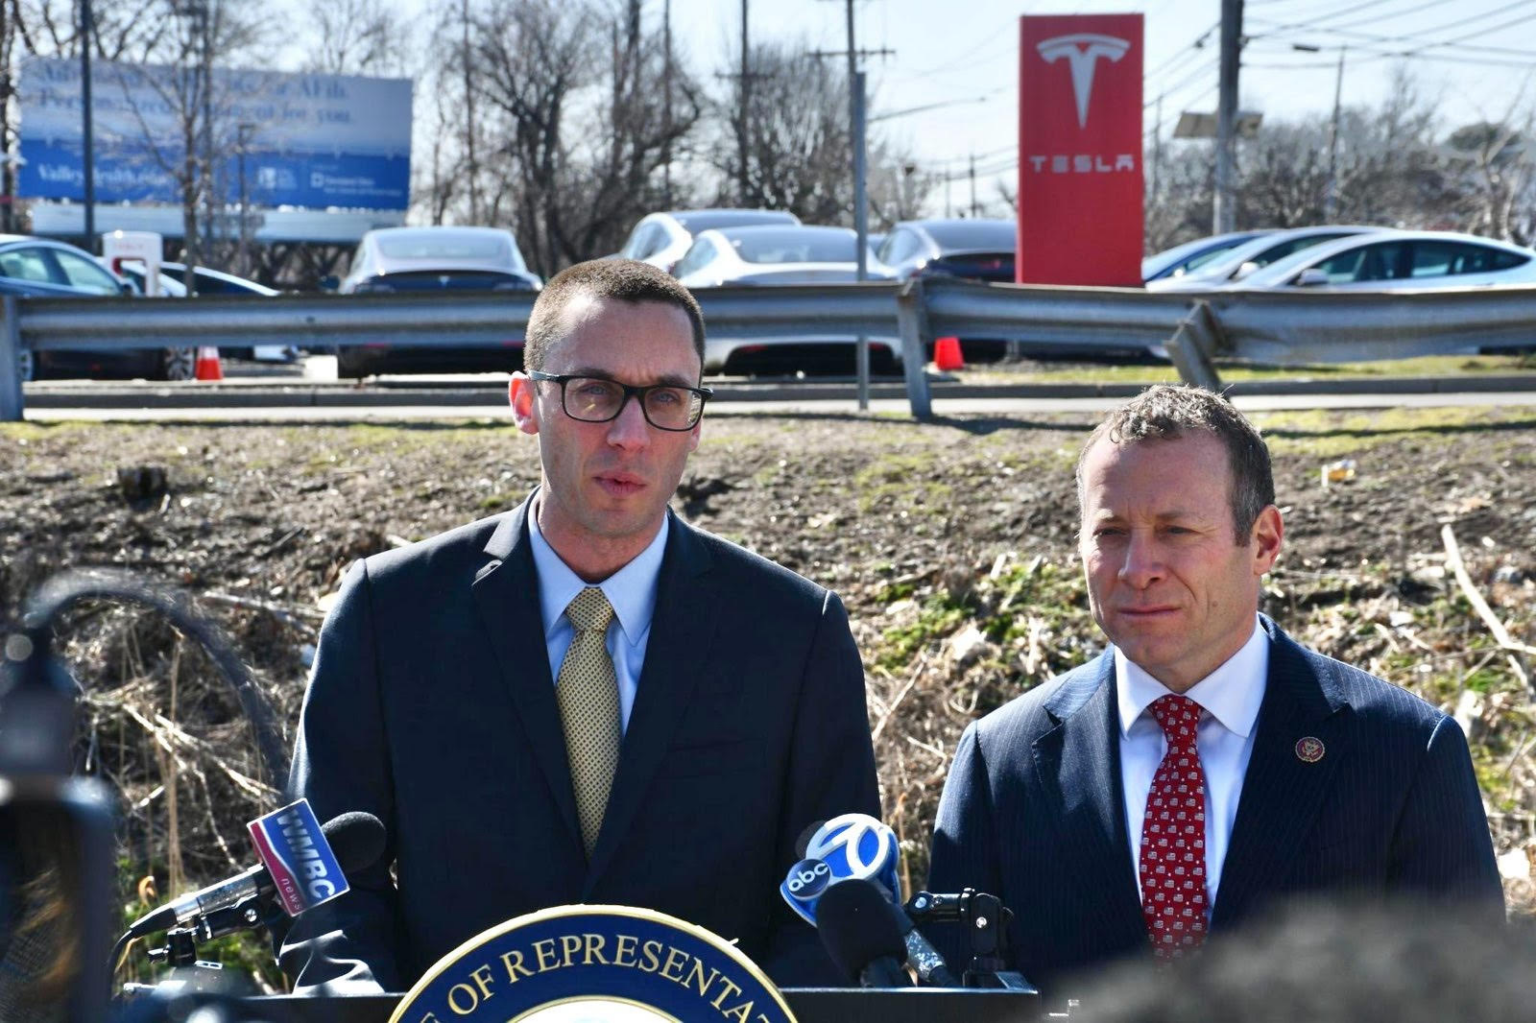 NJ Broadcasters Association joins Rep. Josh Gottheimer in call for AM radio in all electric vehicles